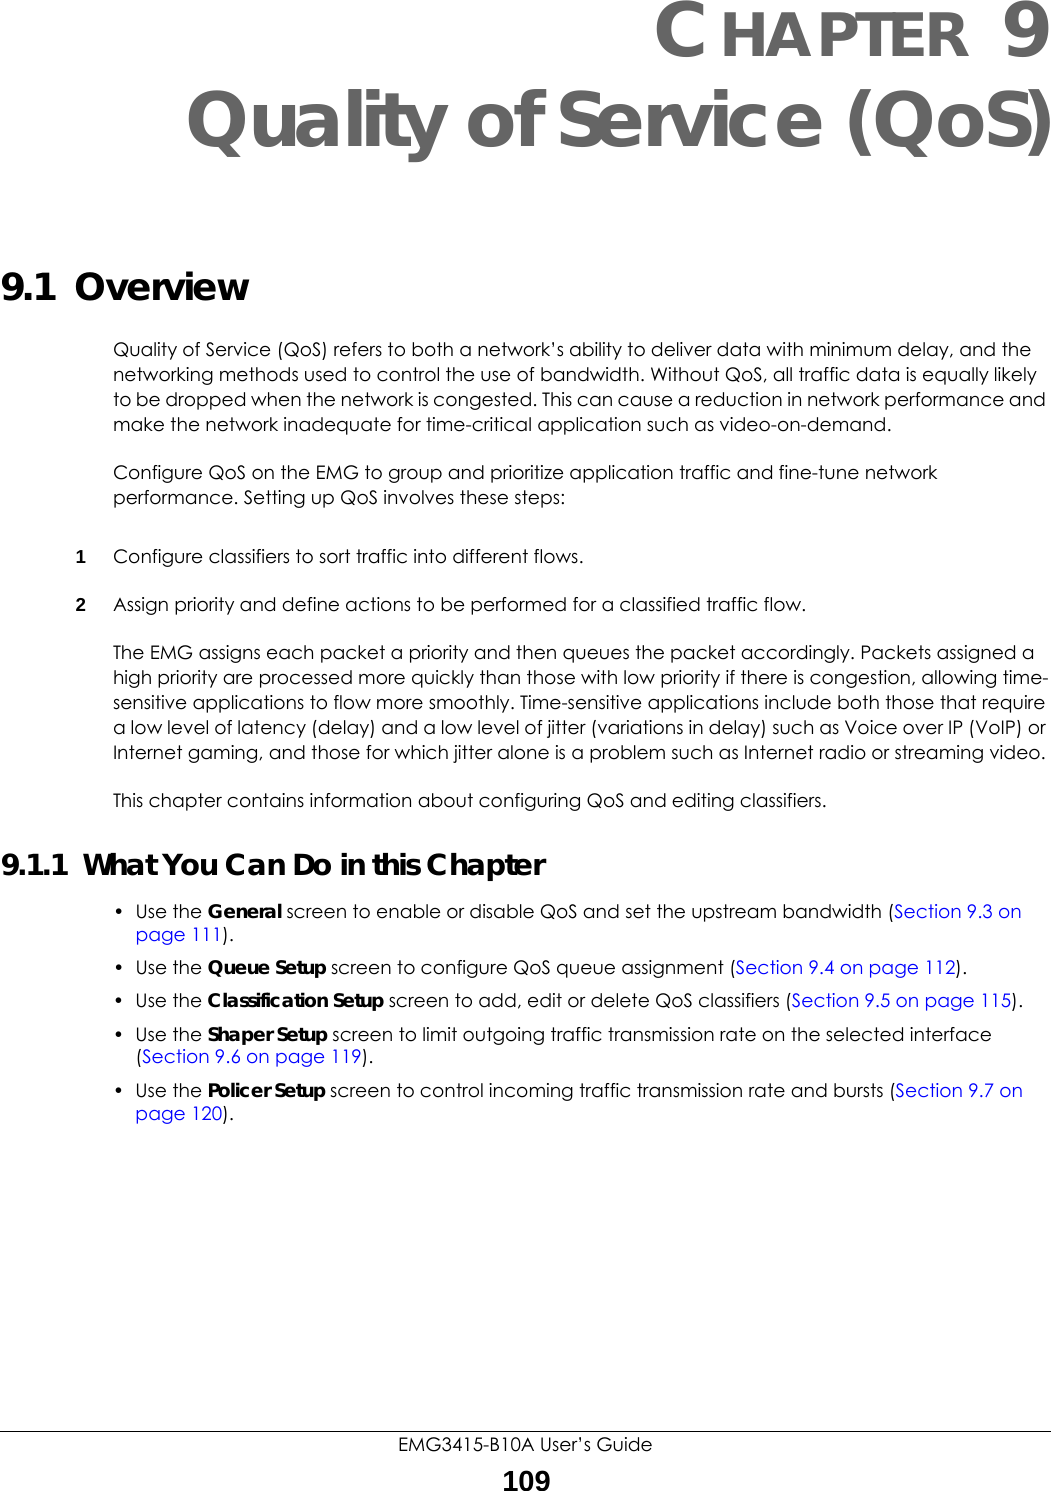 EMG3415-B10A User’s Guide109CHAPTER 9Quality of Service (QoS)9.1  Overview Quality of Service (QoS) refers to both a network’s ability to deliver data with minimum delay, and the networking methods used to control the use of bandwidth. Without QoS, all traffic data is equally likely to be dropped when the network is congested. This can cause a reduction in network performance and make the network inadequate for time-critical application such as video-on-demand.Configure QoS on the EMG to group and prioritize application traffic and fine-tune network performance. Setting up QoS involves these steps:1Configure classifiers to sort traffic into different flows. 2Assign priority and define actions to be performed for a classified traffic flow. The EMG assigns each packet a priority and then queues the packet accordingly. Packets assigned a high priority are processed more quickly than those with low priority if there is congestion, allowing time-sensitive applications to flow more smoothly. Time-sensitive applications include both those that require a low level of latency (delay) and a low level of jitter (variations in delay) such as Voice over IP (VoIP) or Internet gaming, and those for which jitter alone is a problem such as Internet radio or streaming video.This chapter contains information about configuring QoS and editing classifiers.9.1.1  What You Can Do in this Chapter• Use the General screen to enable or disable QoS and set the upstream bandwidth (Section 9.3 on page 111).• Use the Queue Setup screen to configure QoS queue assignment (Section 9.4 on page 112).• Use the Classification Setup screen to add, edit or delete QoS classifiers (Section 9.5 on page 115).• Use the Shaper Setup screen to limit outgoing traffic transmission rate on the selected interface (Section 9.6 on page 119).• Use the Policer Setup screen to control incoming traffic transmission rate and bursts (Section 9.7 on page 120).